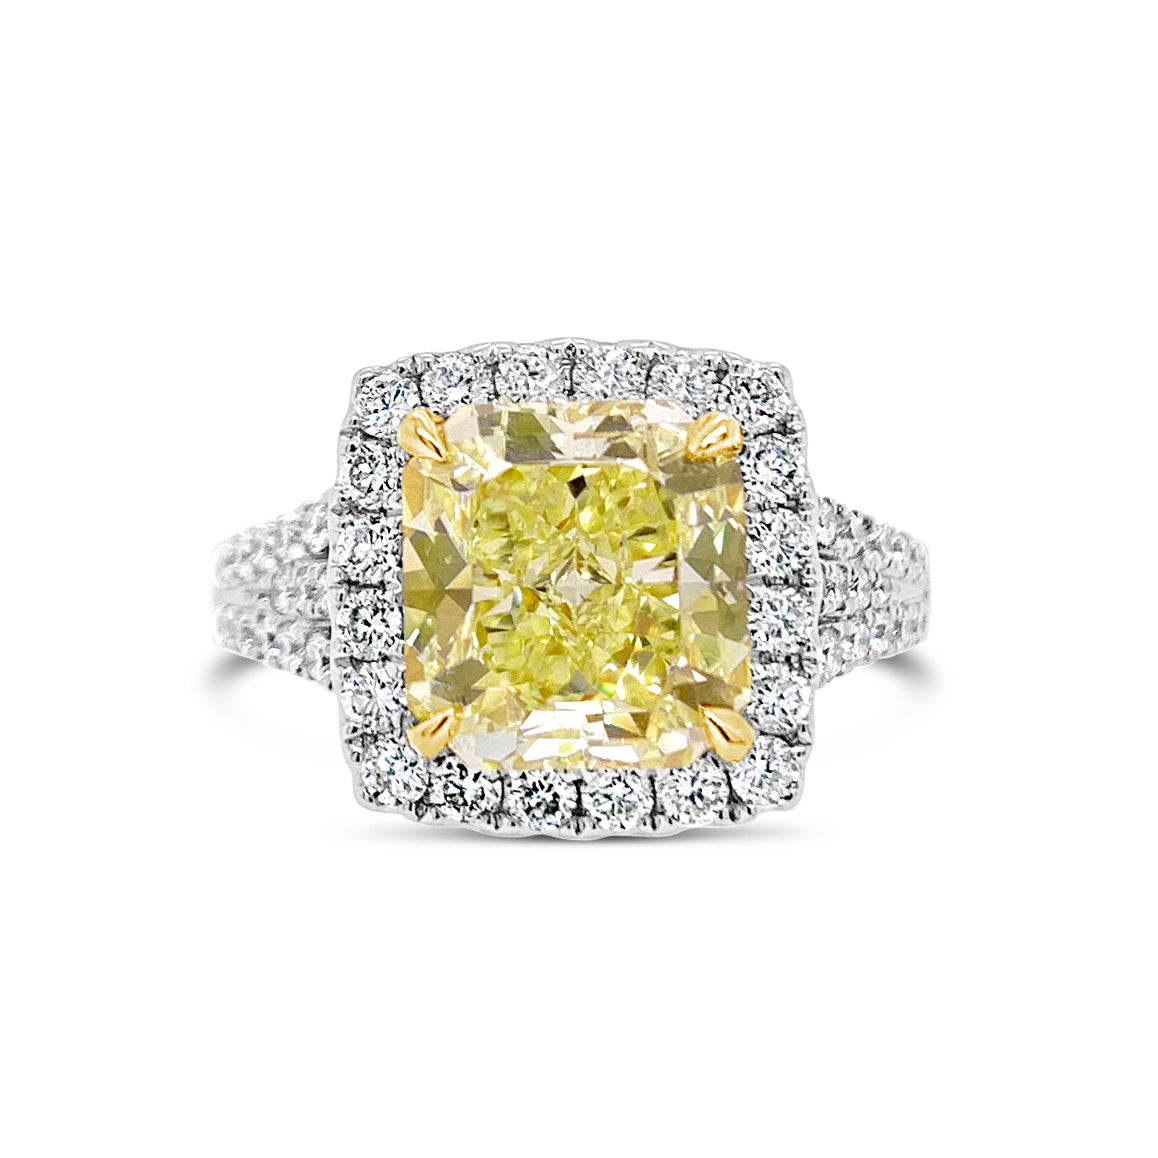 Fancy Light Yellow Radiant Halo Diamond Engagement Ring  - 18 kt white gold weighting 6.09 grams  - 68 round diamonds totaling 0.93 carats  - 1 Fancy light yellow radiant cut totaling 3.29 VS2-GIA